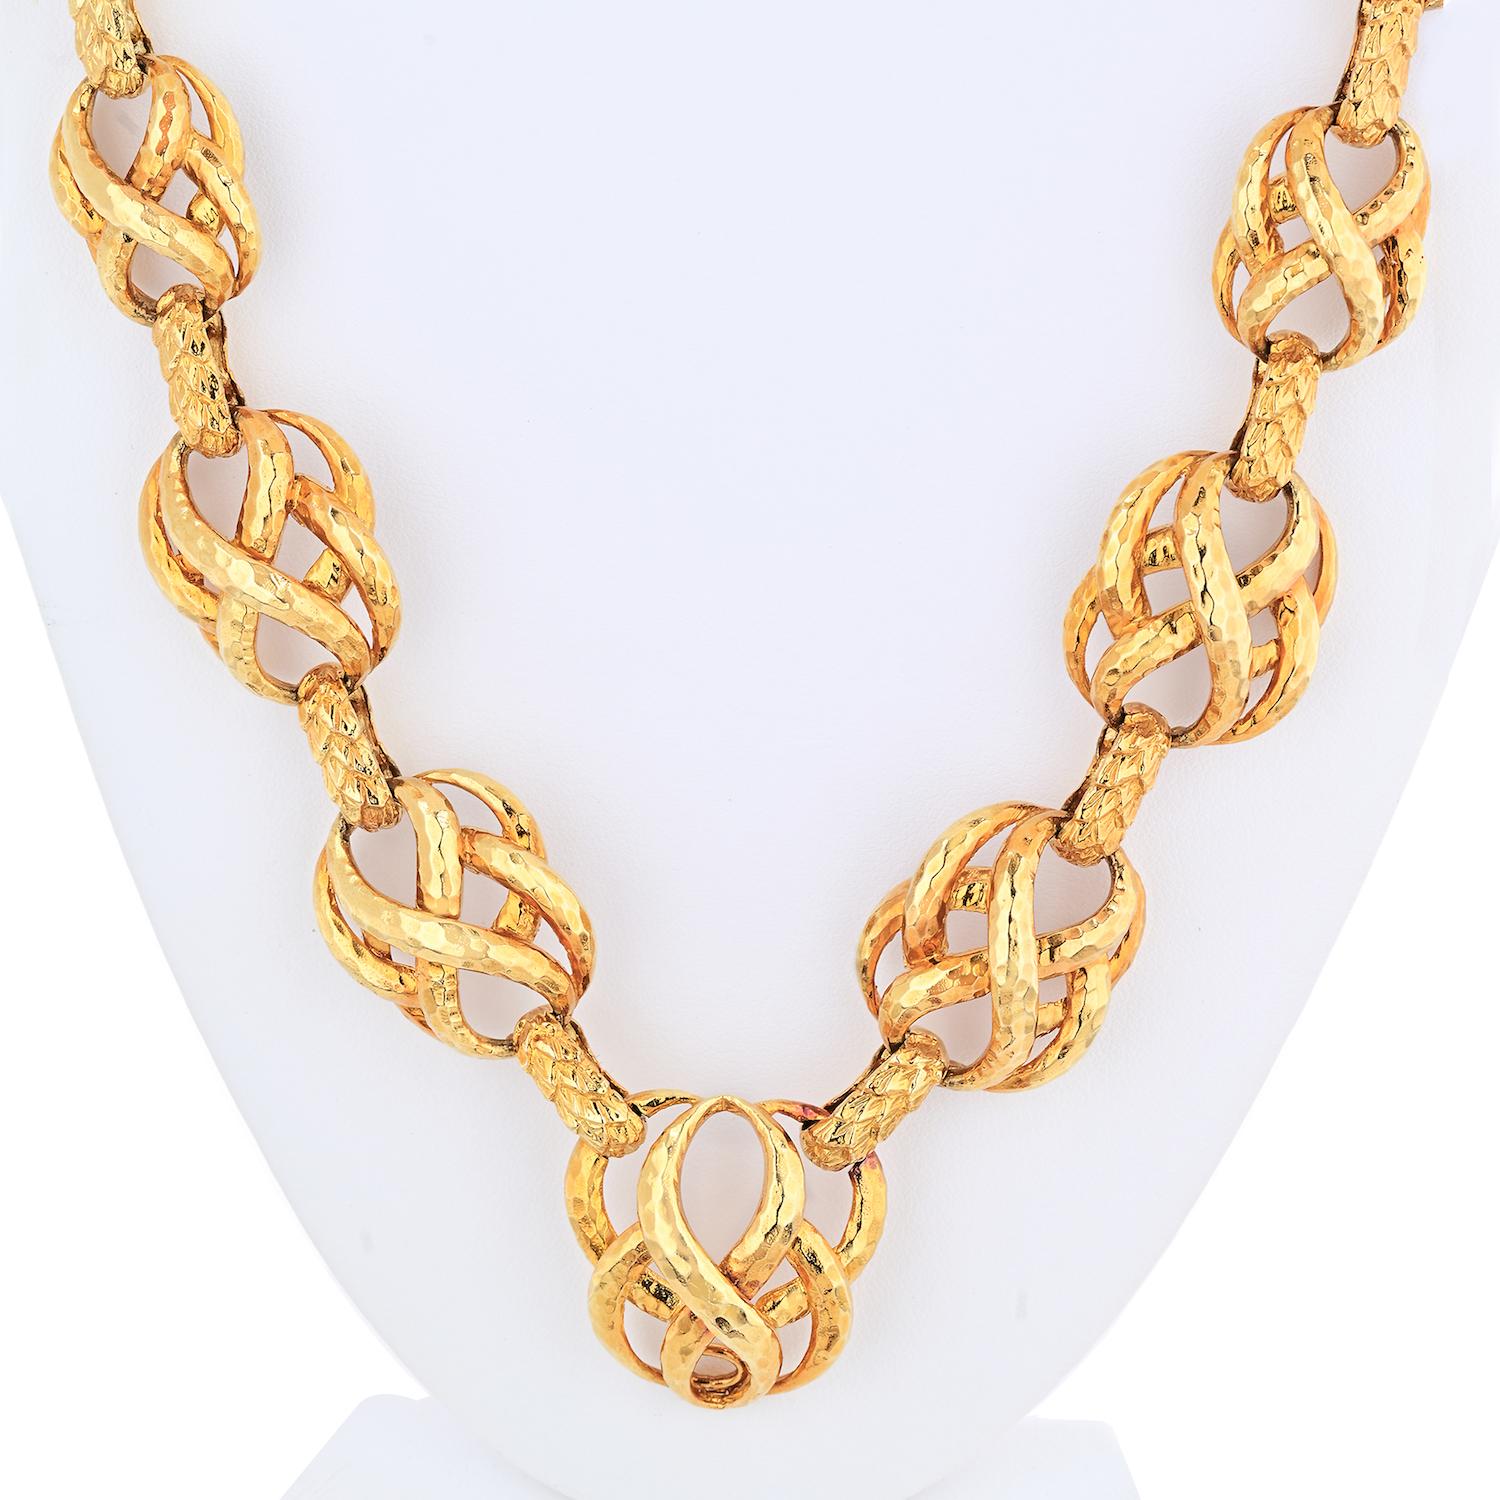 Bold and heavy yellow gold necklace created by David Webb in the 1980's. The intricate link shape with an infinity sign in the middle was inspired by ancient Celtic motifs and is finished with a signature hammer and wheat design. 
L: 30 inches